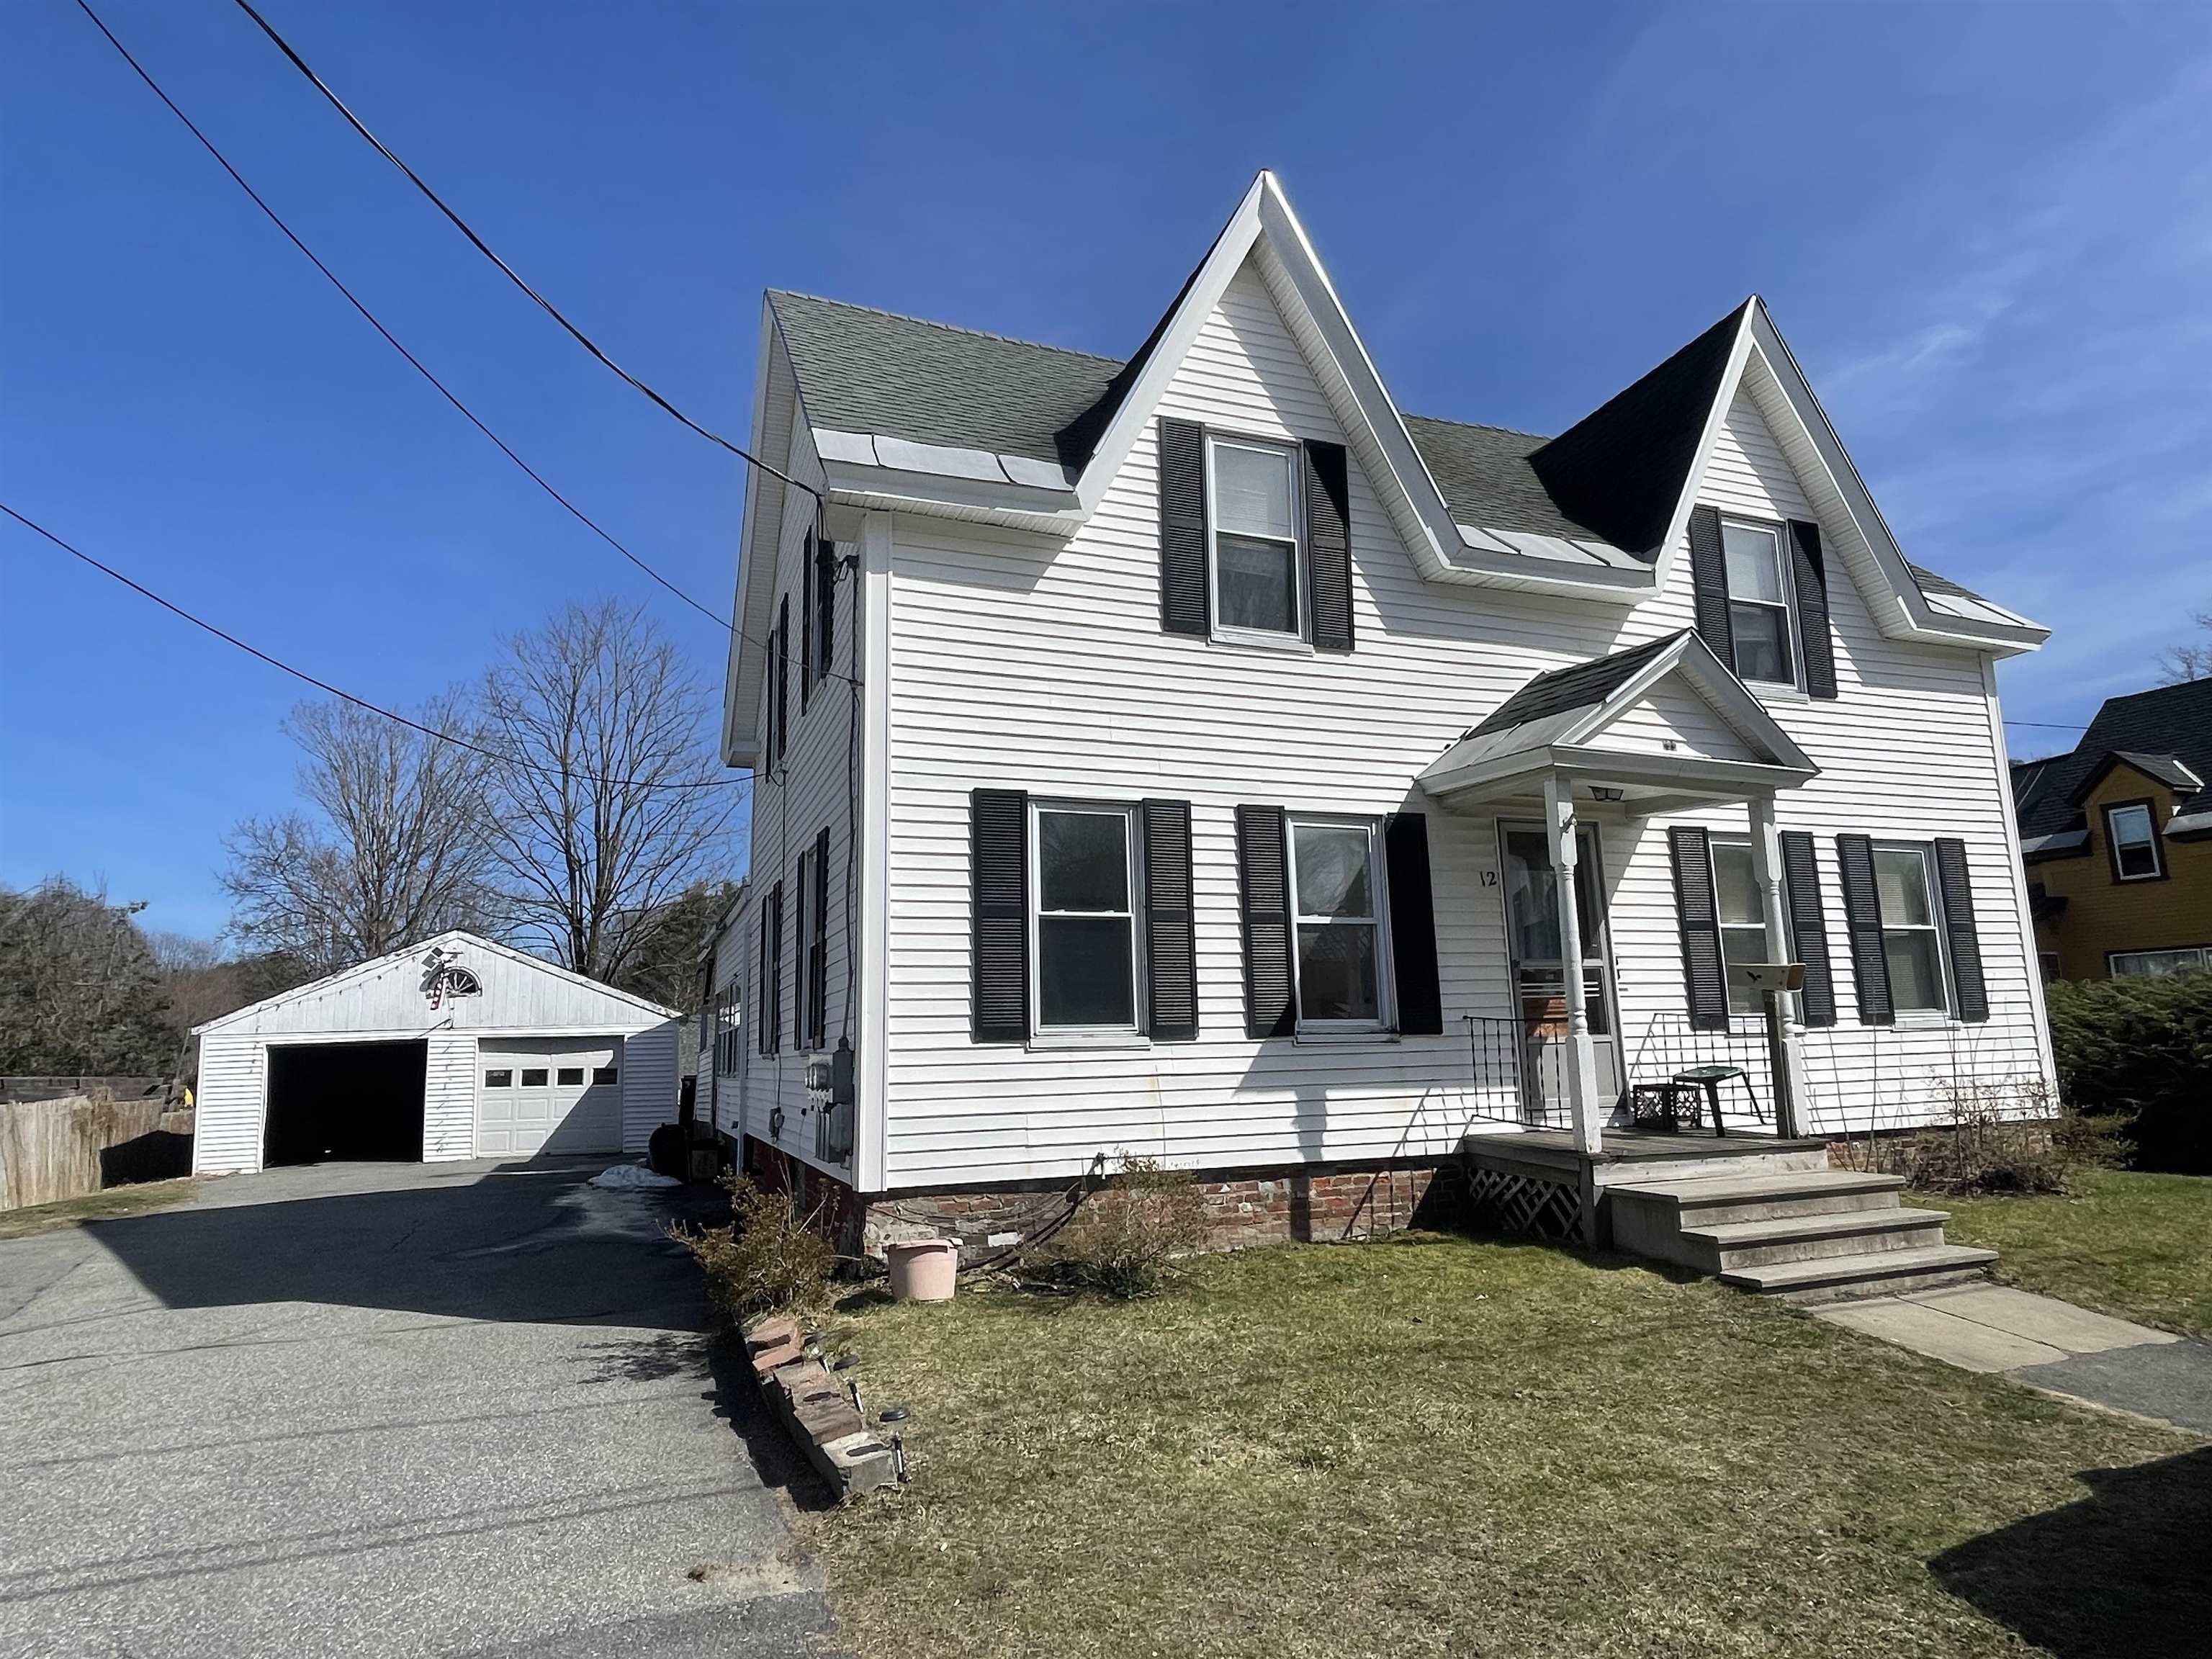 image of Claremont NH  2 Unit Multi Family | sq.ft. 3339 